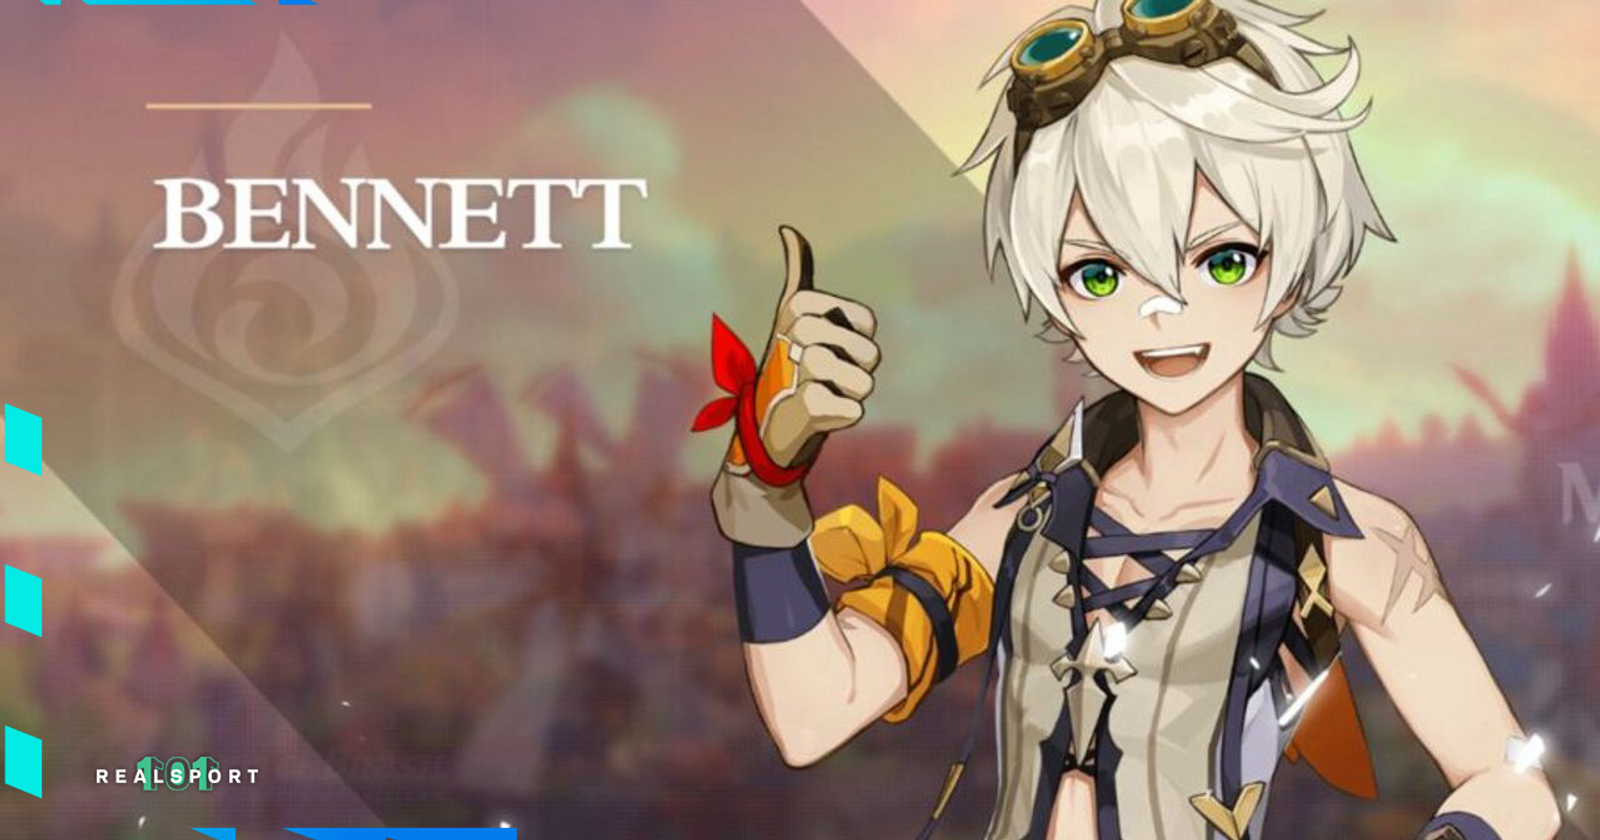 Ascension And Talent Materials For Bennett In Genshin Impact